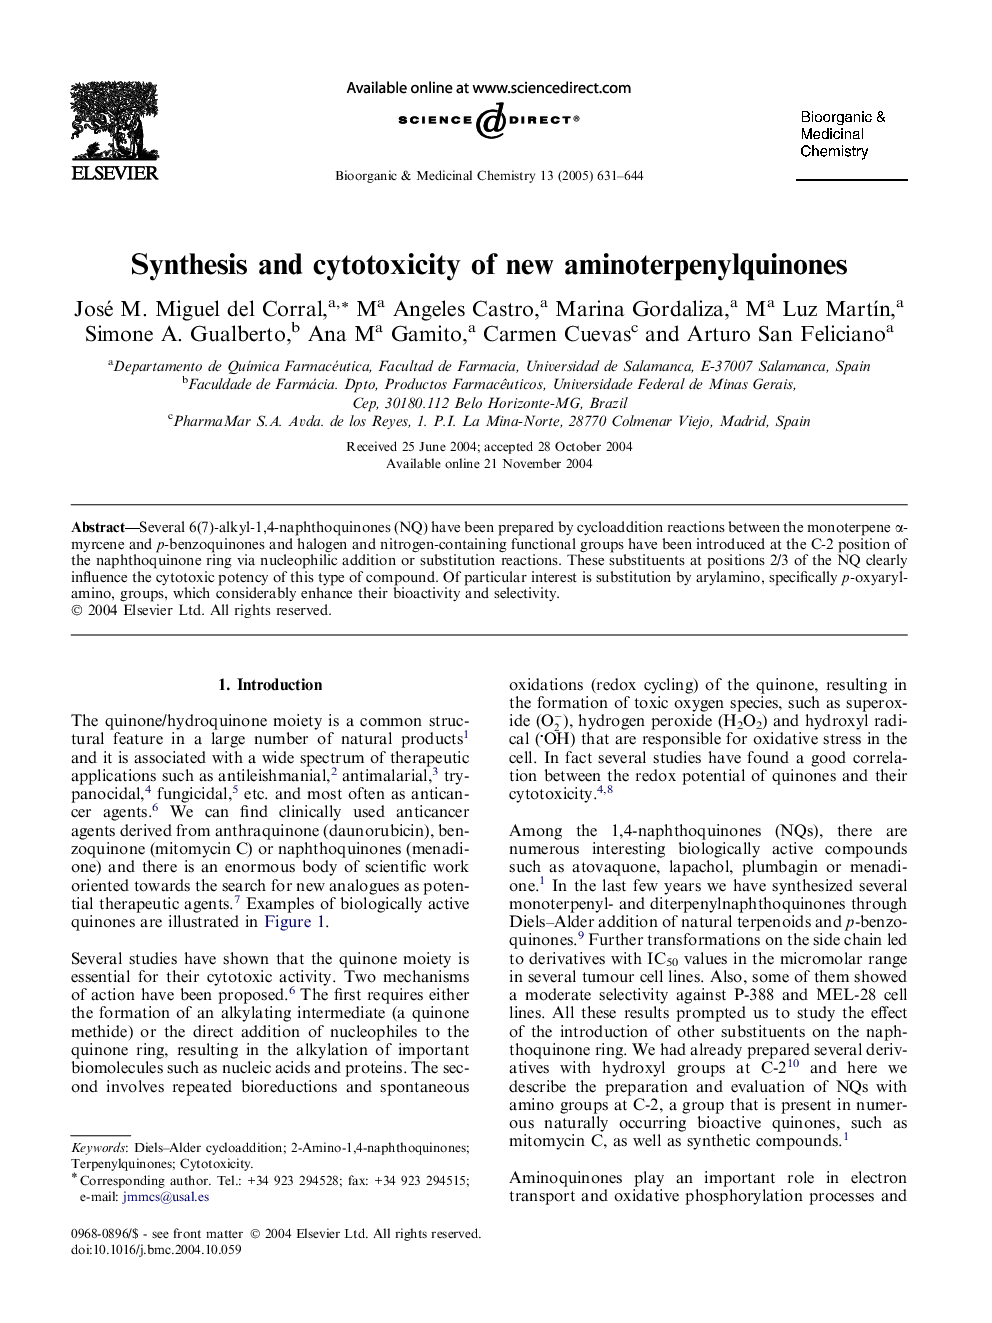 Synthesis and cytotoxicity of new aminoterpenylquinones